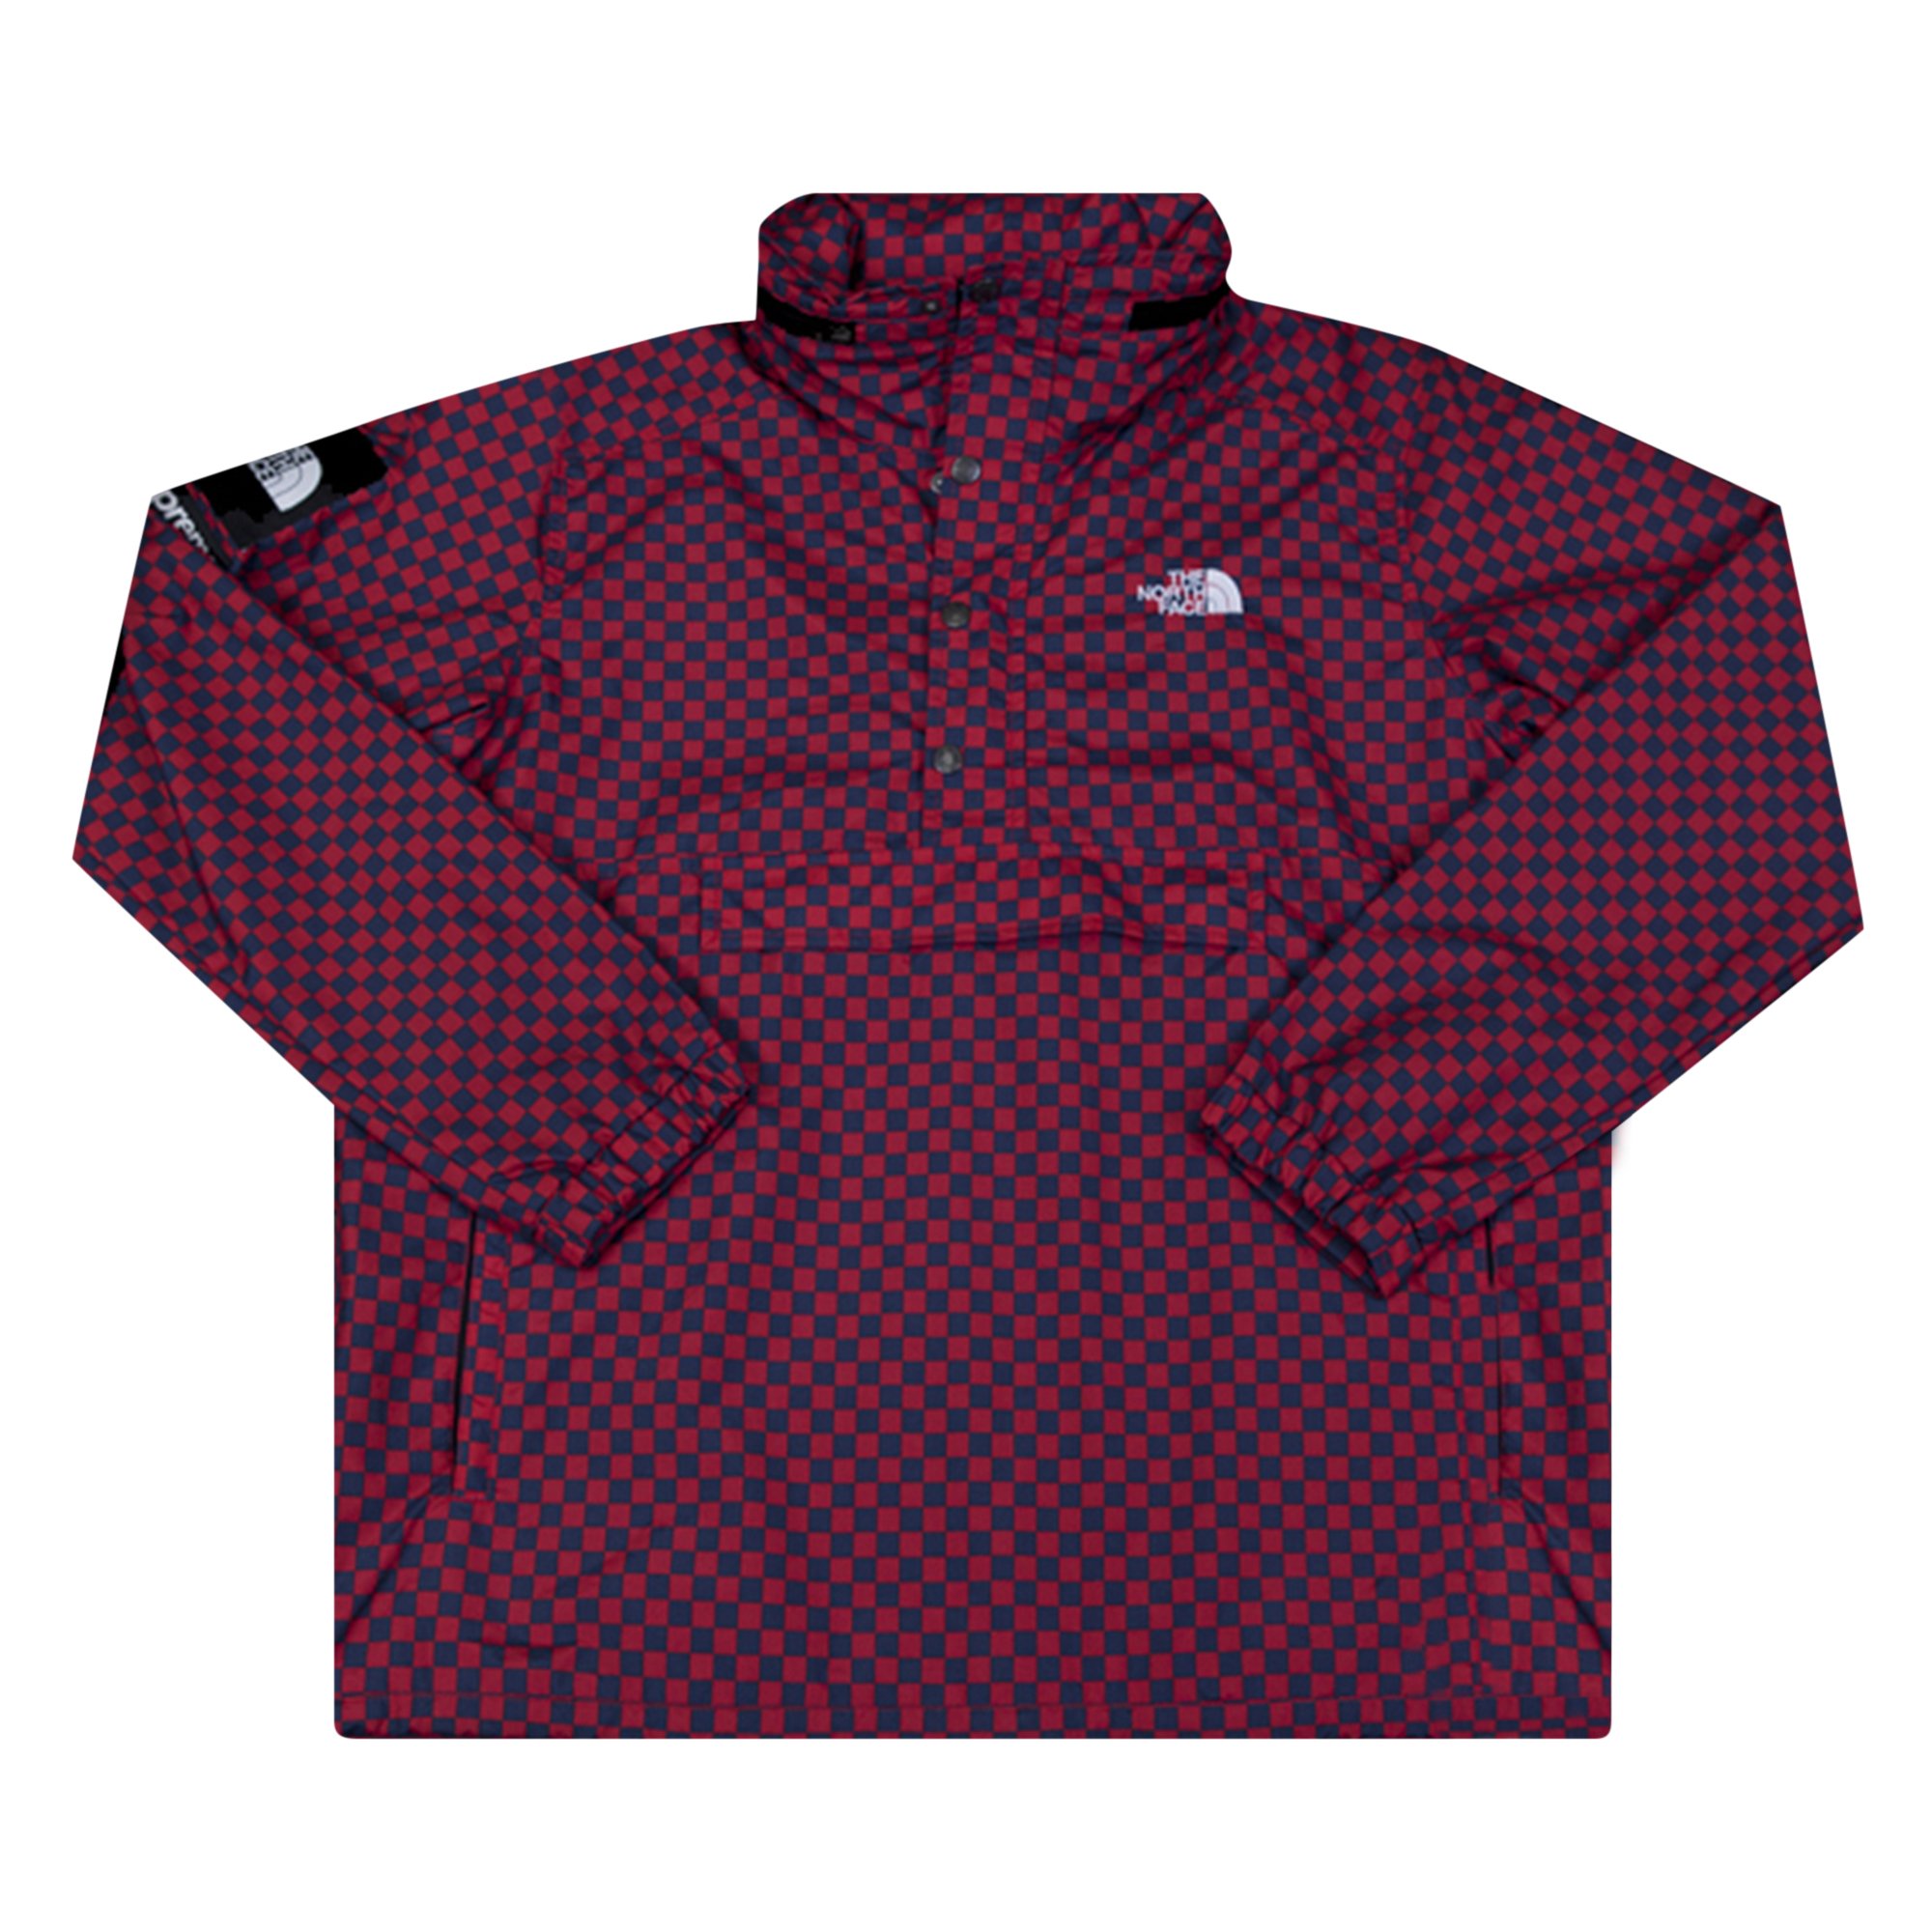 Buy Supreme x The North Face Pullover Checkered Jacket 'Red/Navy 